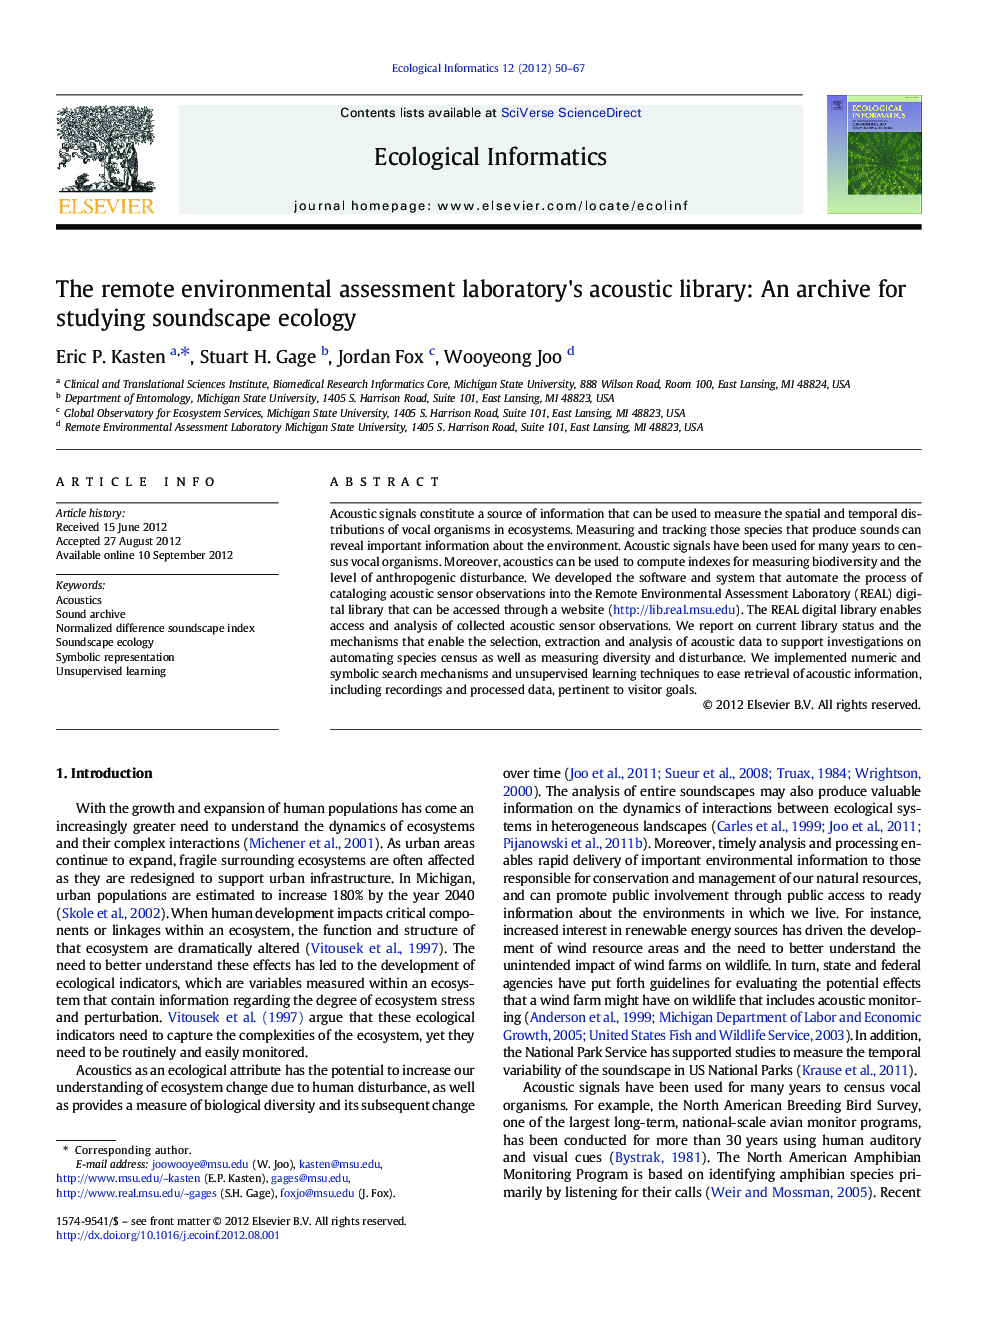 The remote environmental assessment laboratory's acoustic library: An archive for studying soundscape ecology